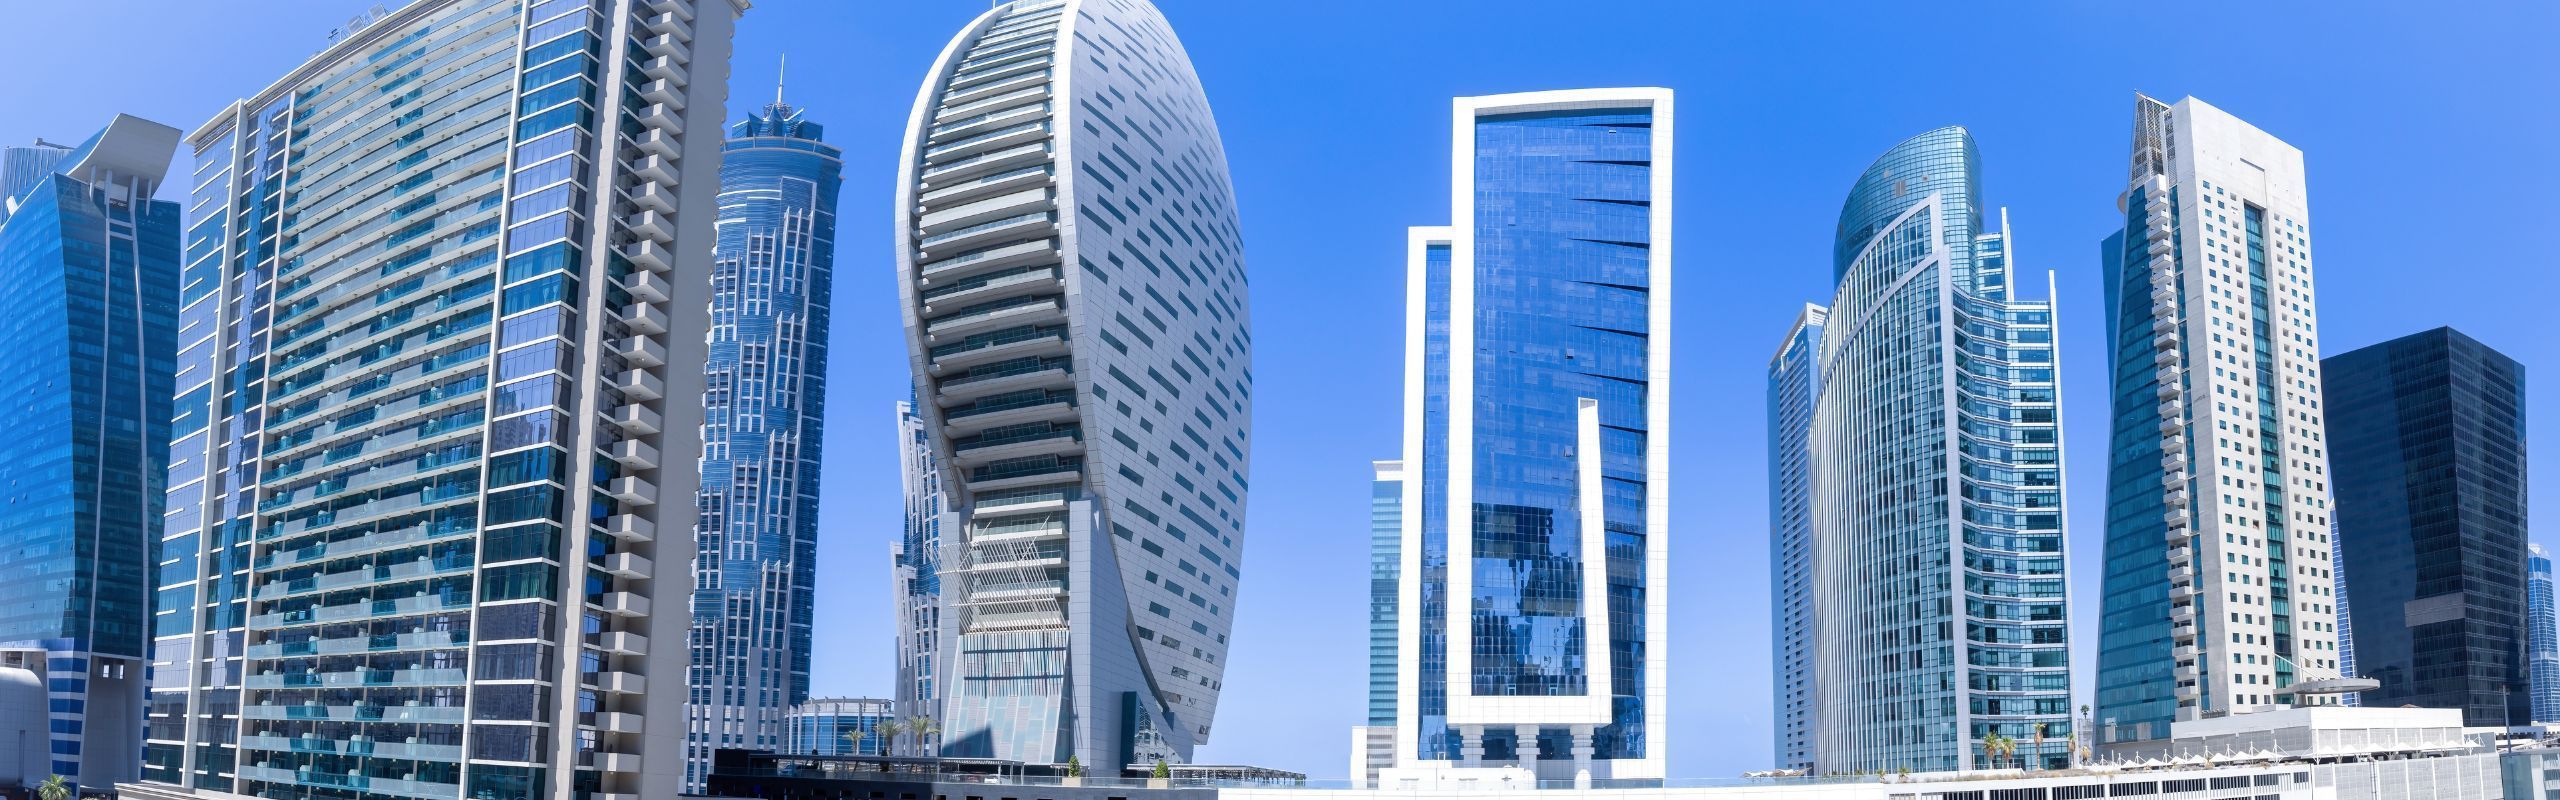 Image of Dubai downtown financial skyline and business shopping center